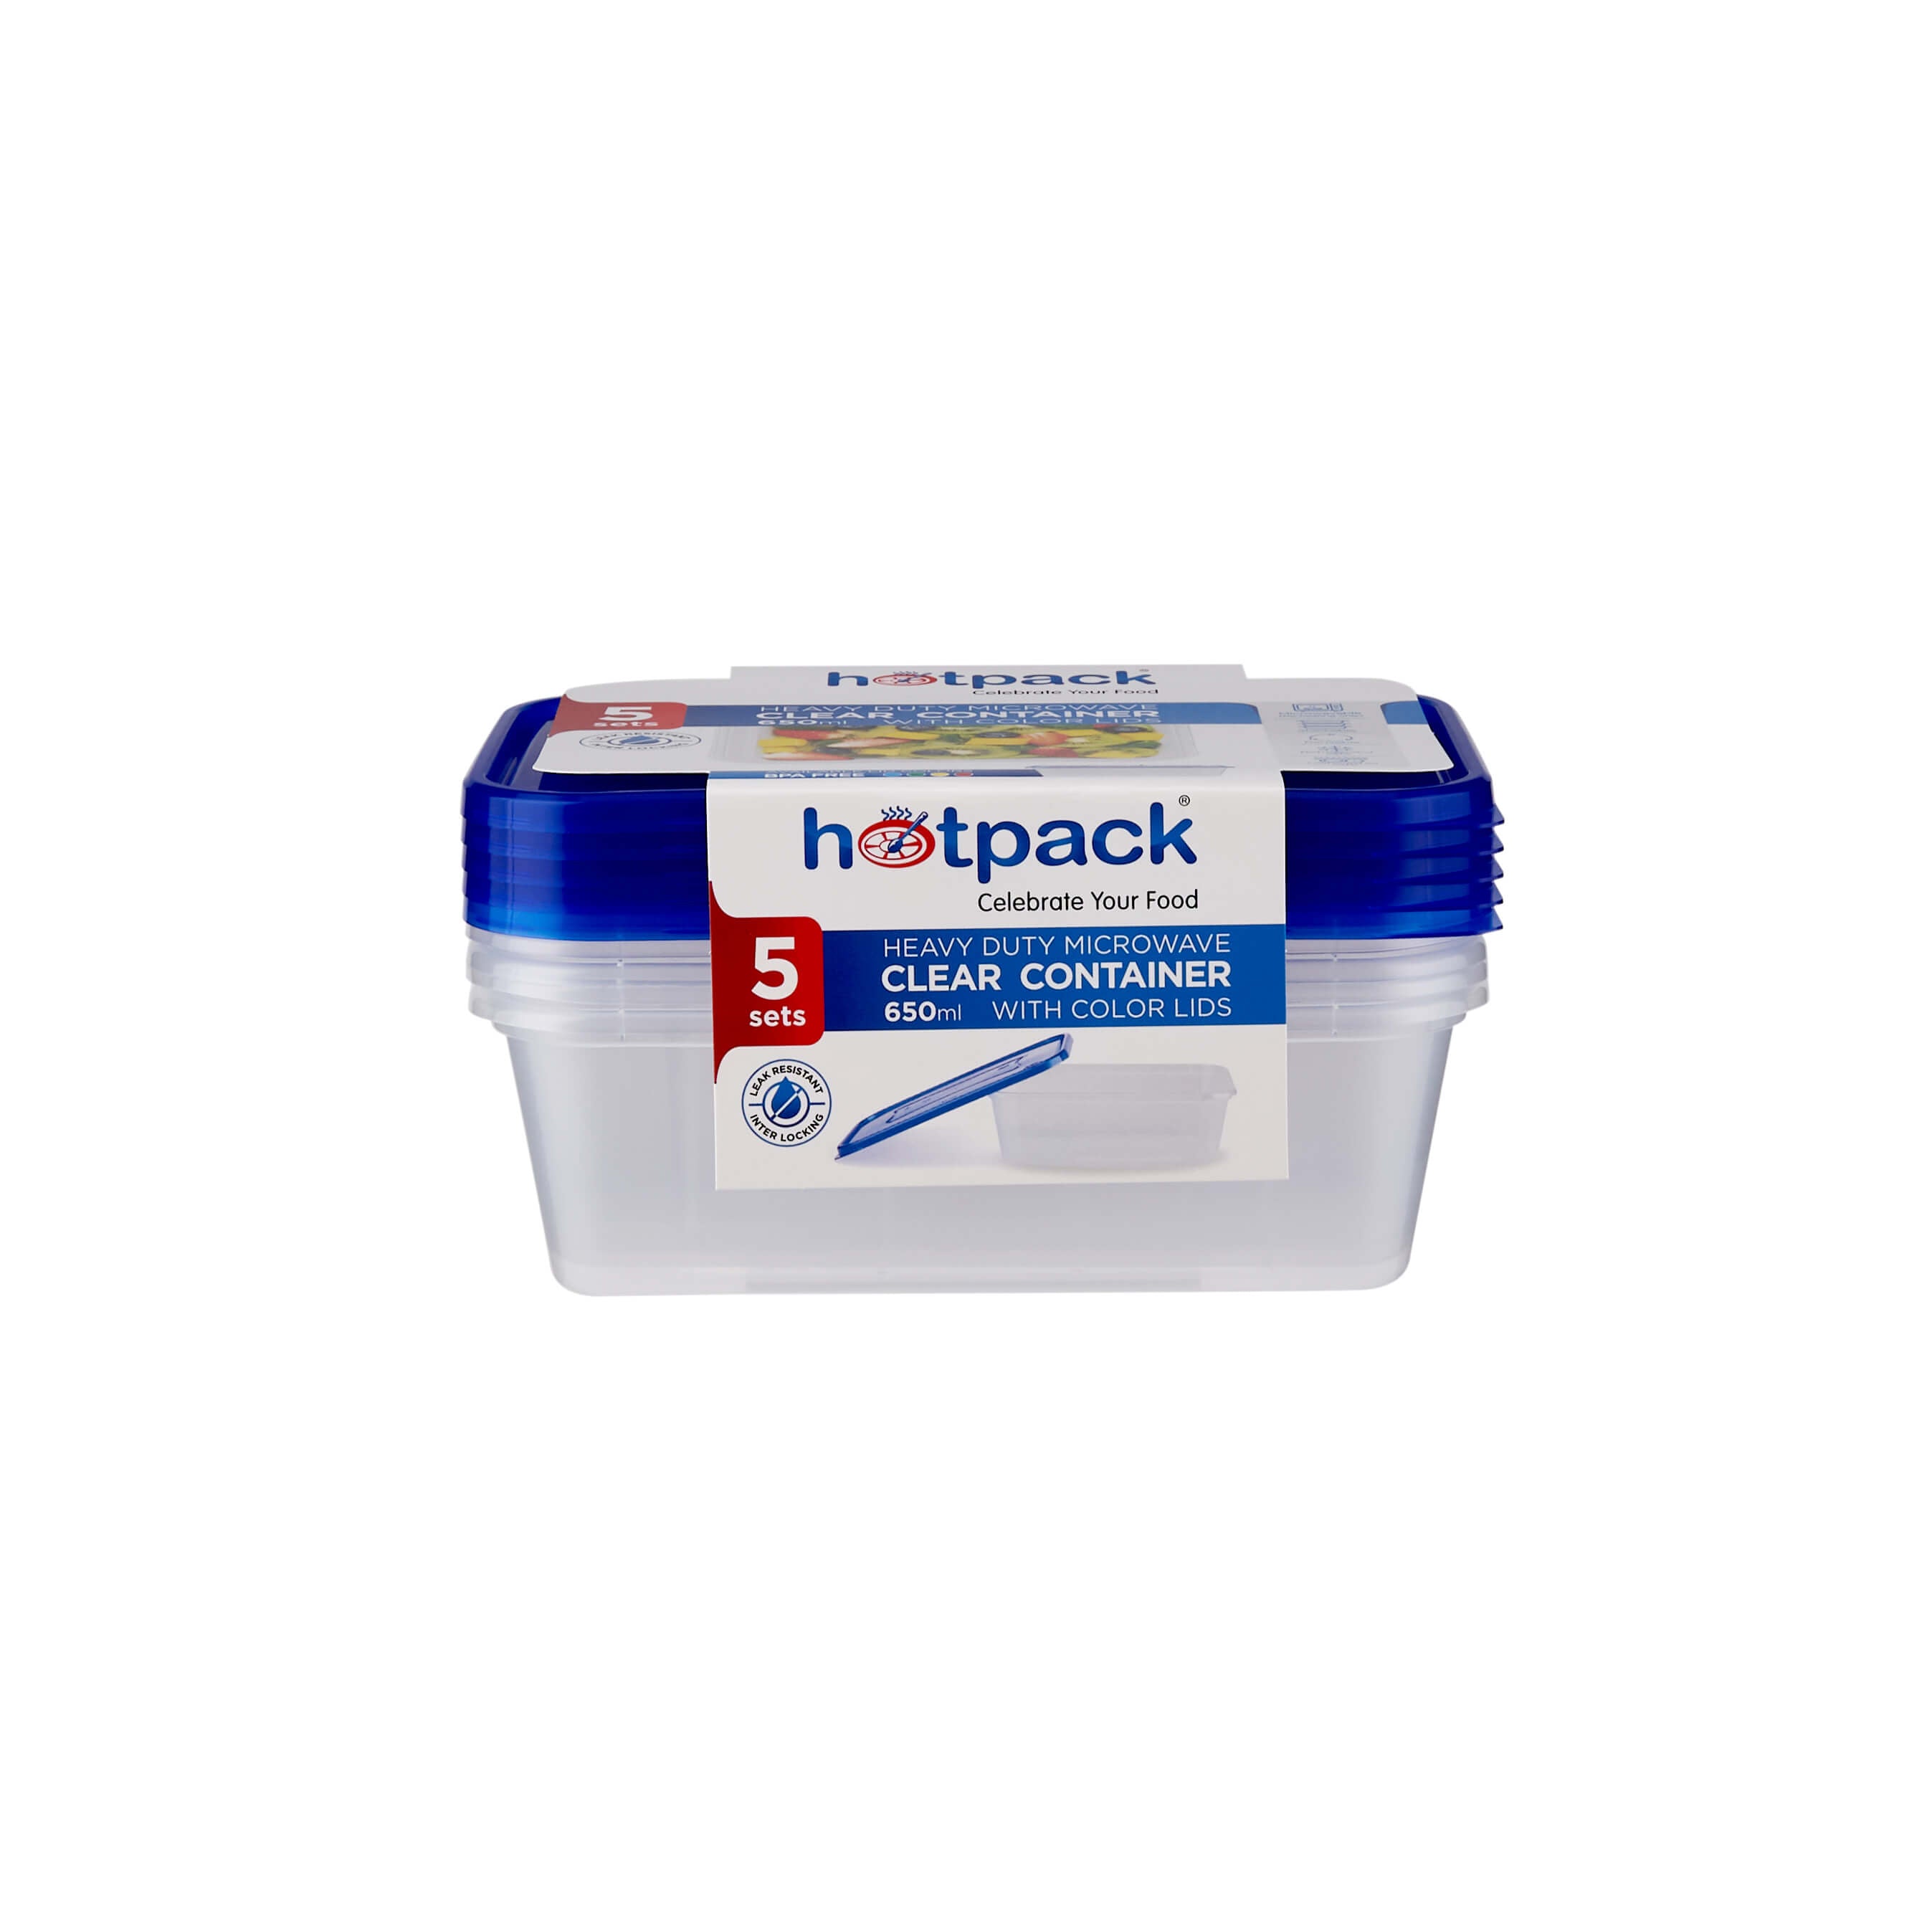 Buy Clean, Disposable and Hygienic rectangular ice cream container 